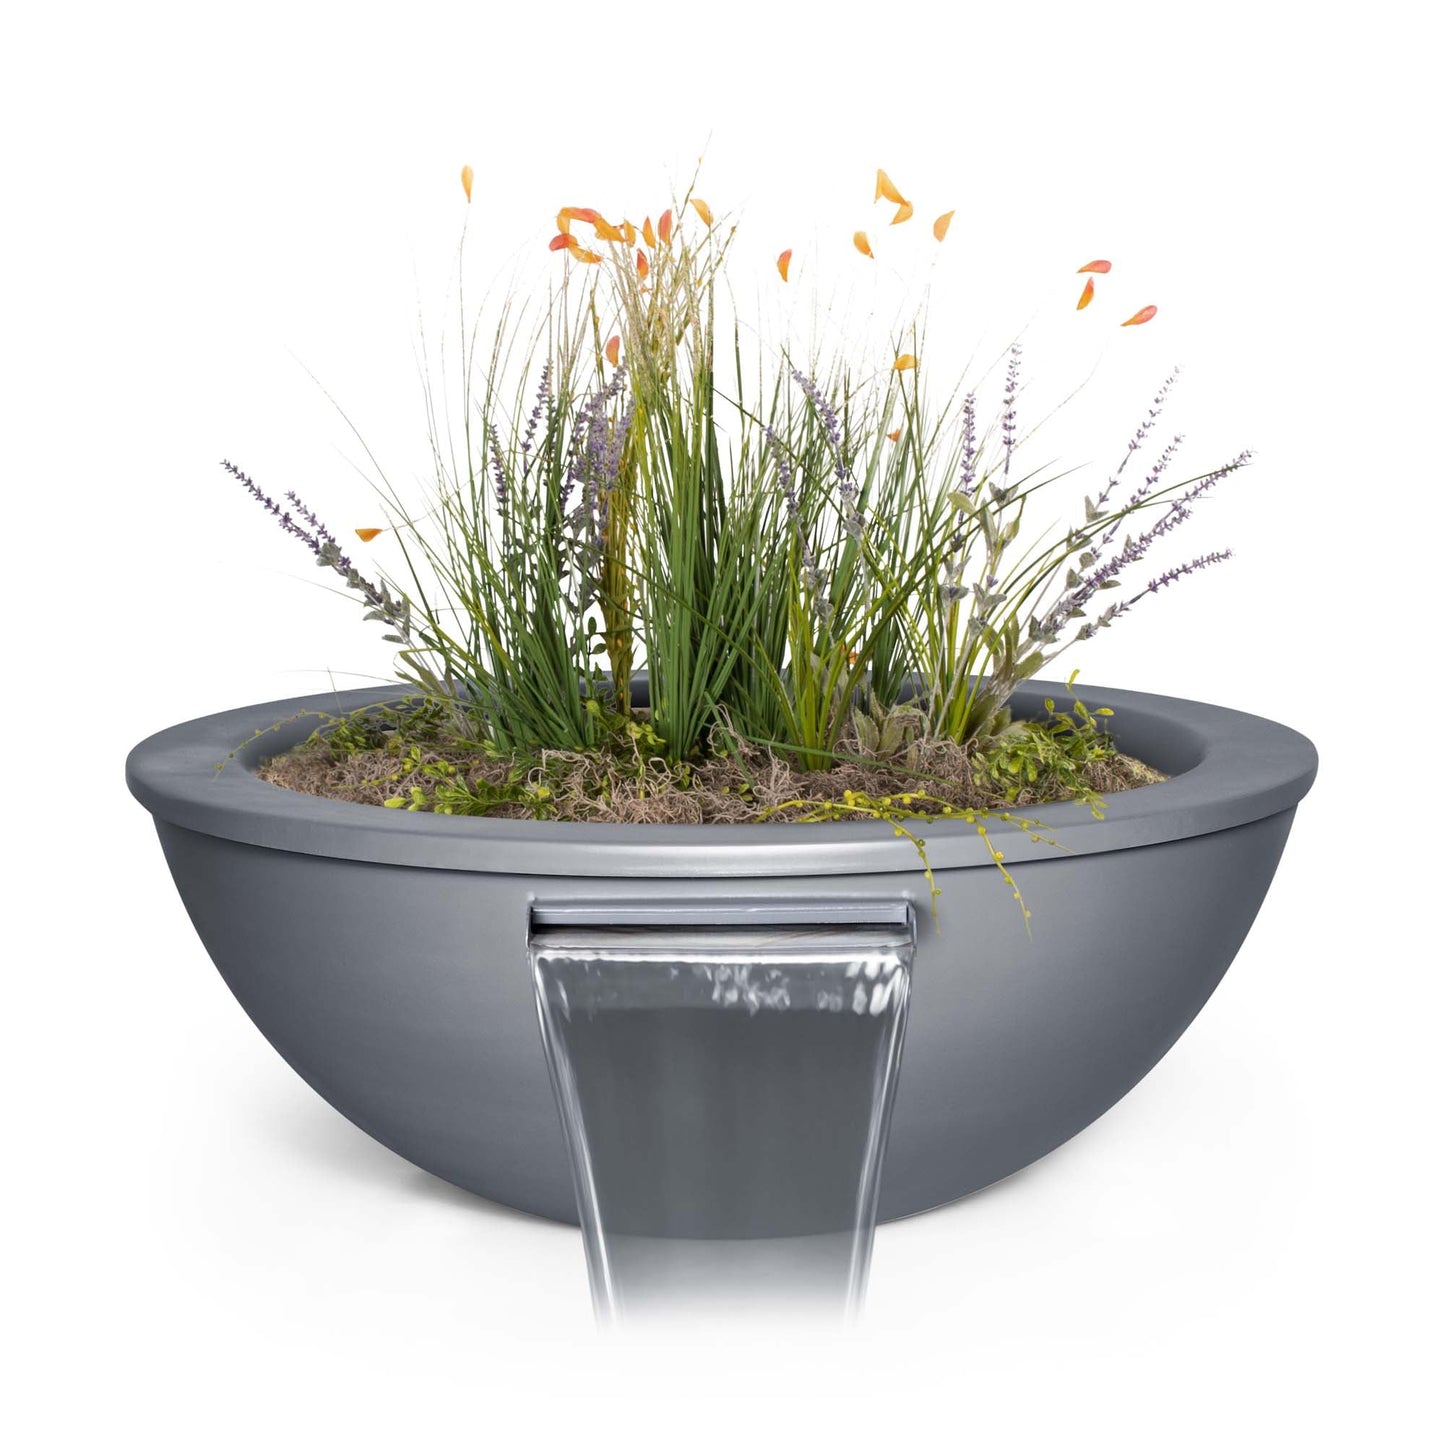 The Outdoor Plus Sedona Powdercoated Steel Planter & Water Bowl